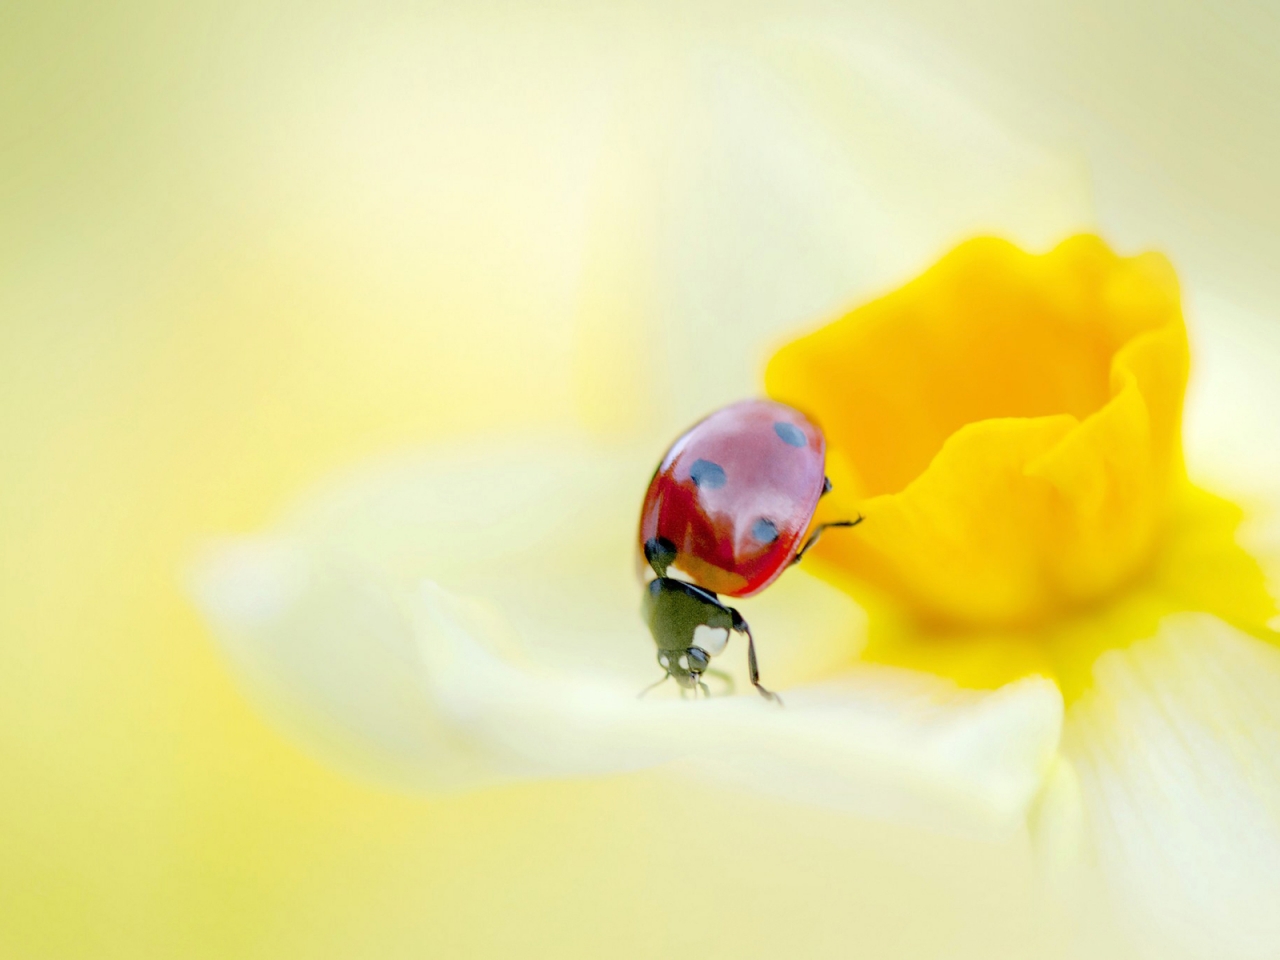 Ladybird on a Yellow Daffodil Flower  for 1280 x 960 resolution